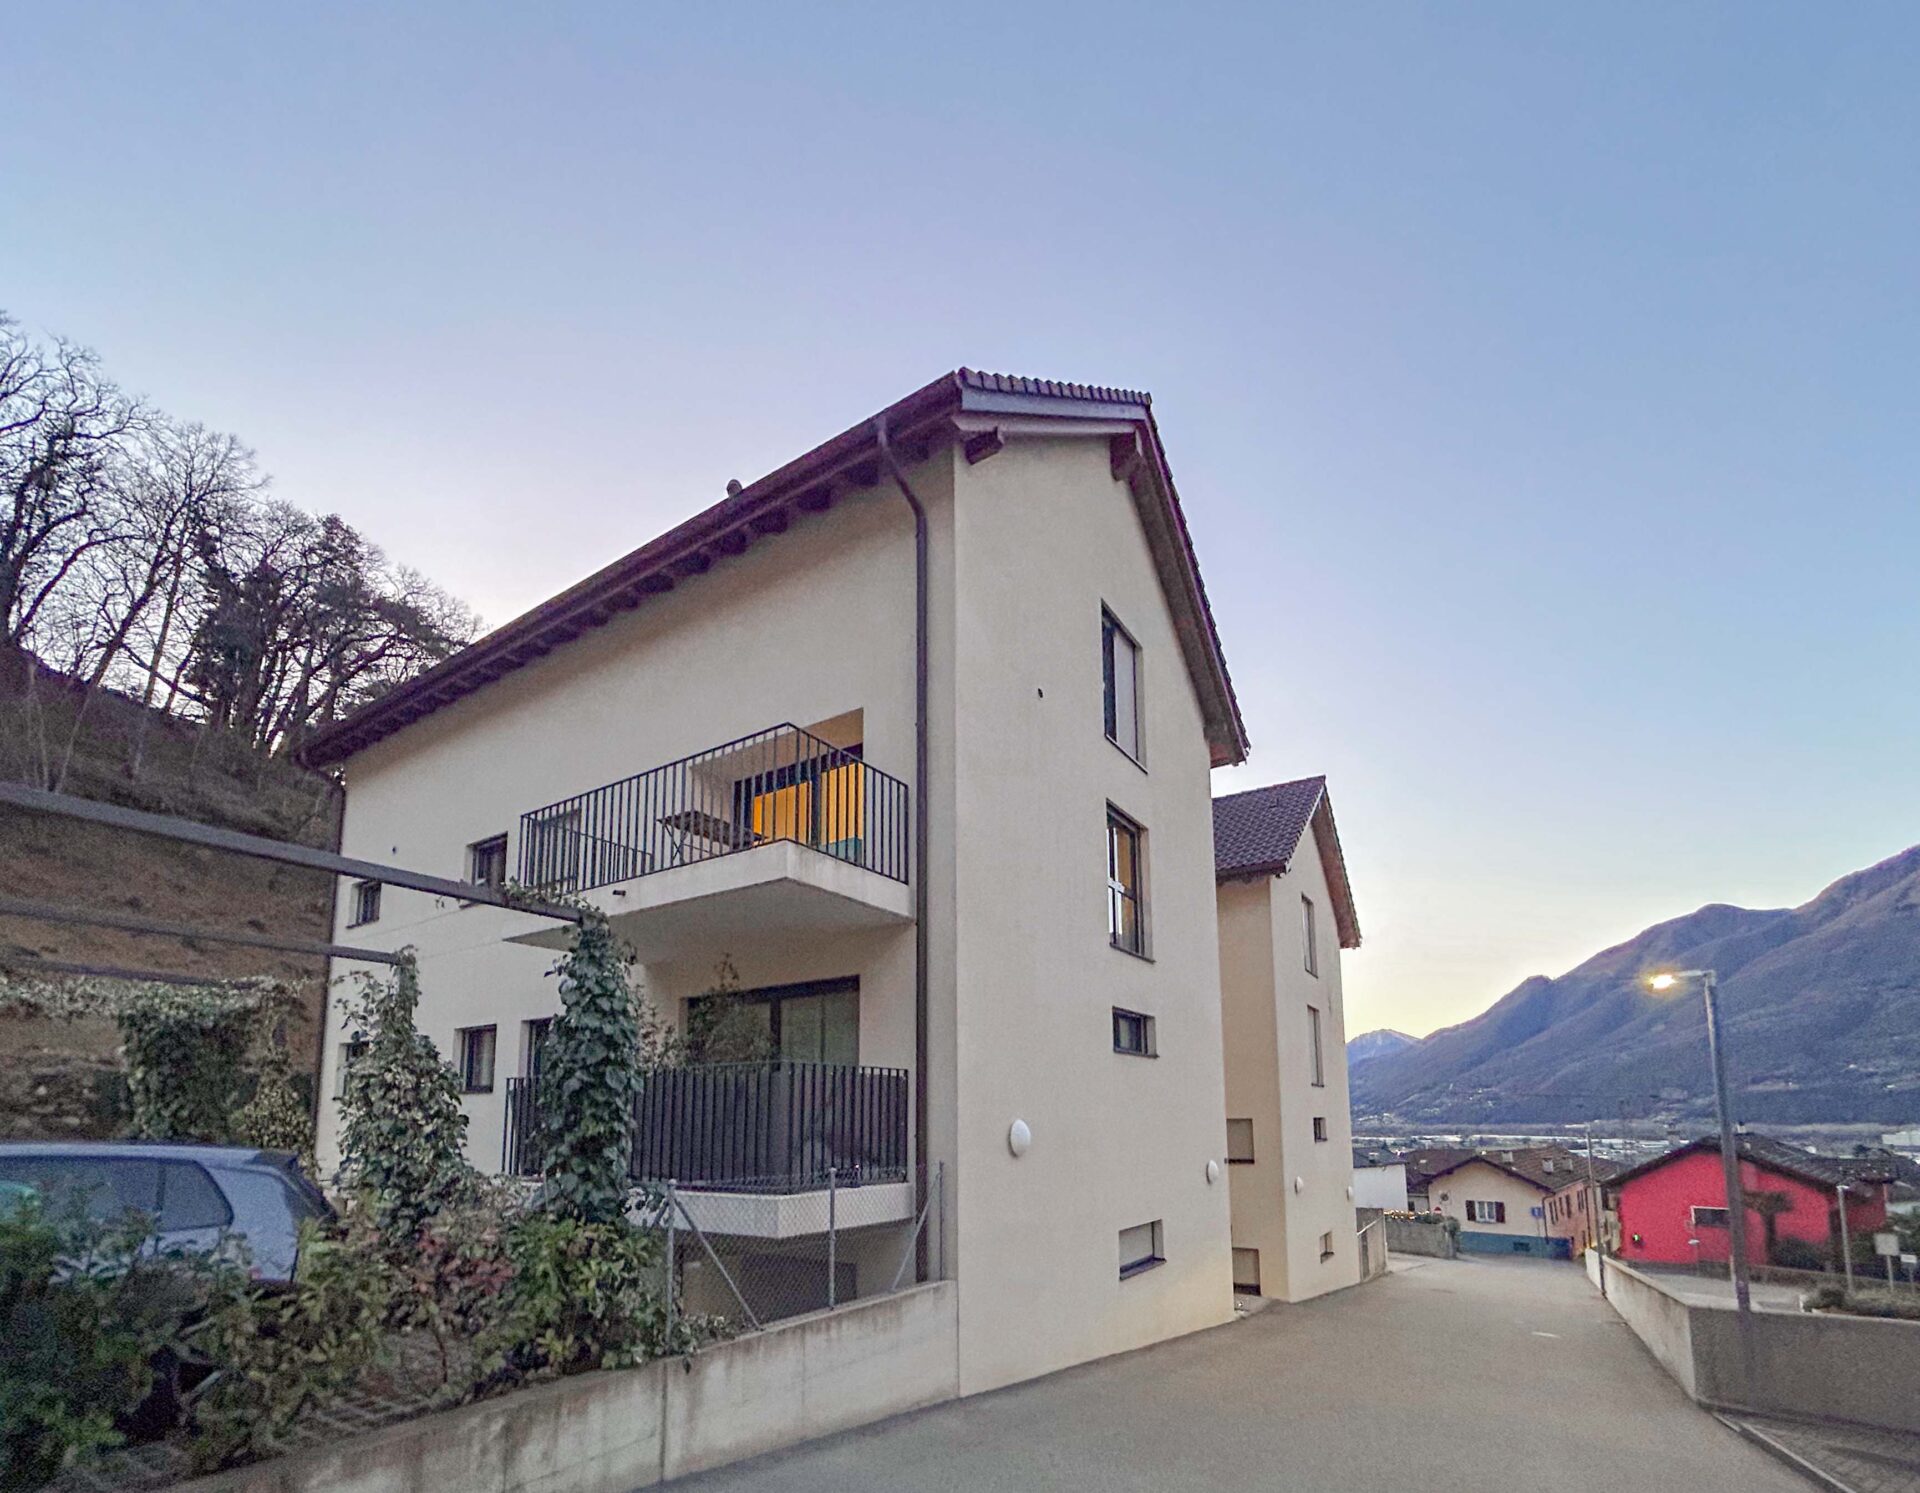 Modern apartment for sale in Camorino